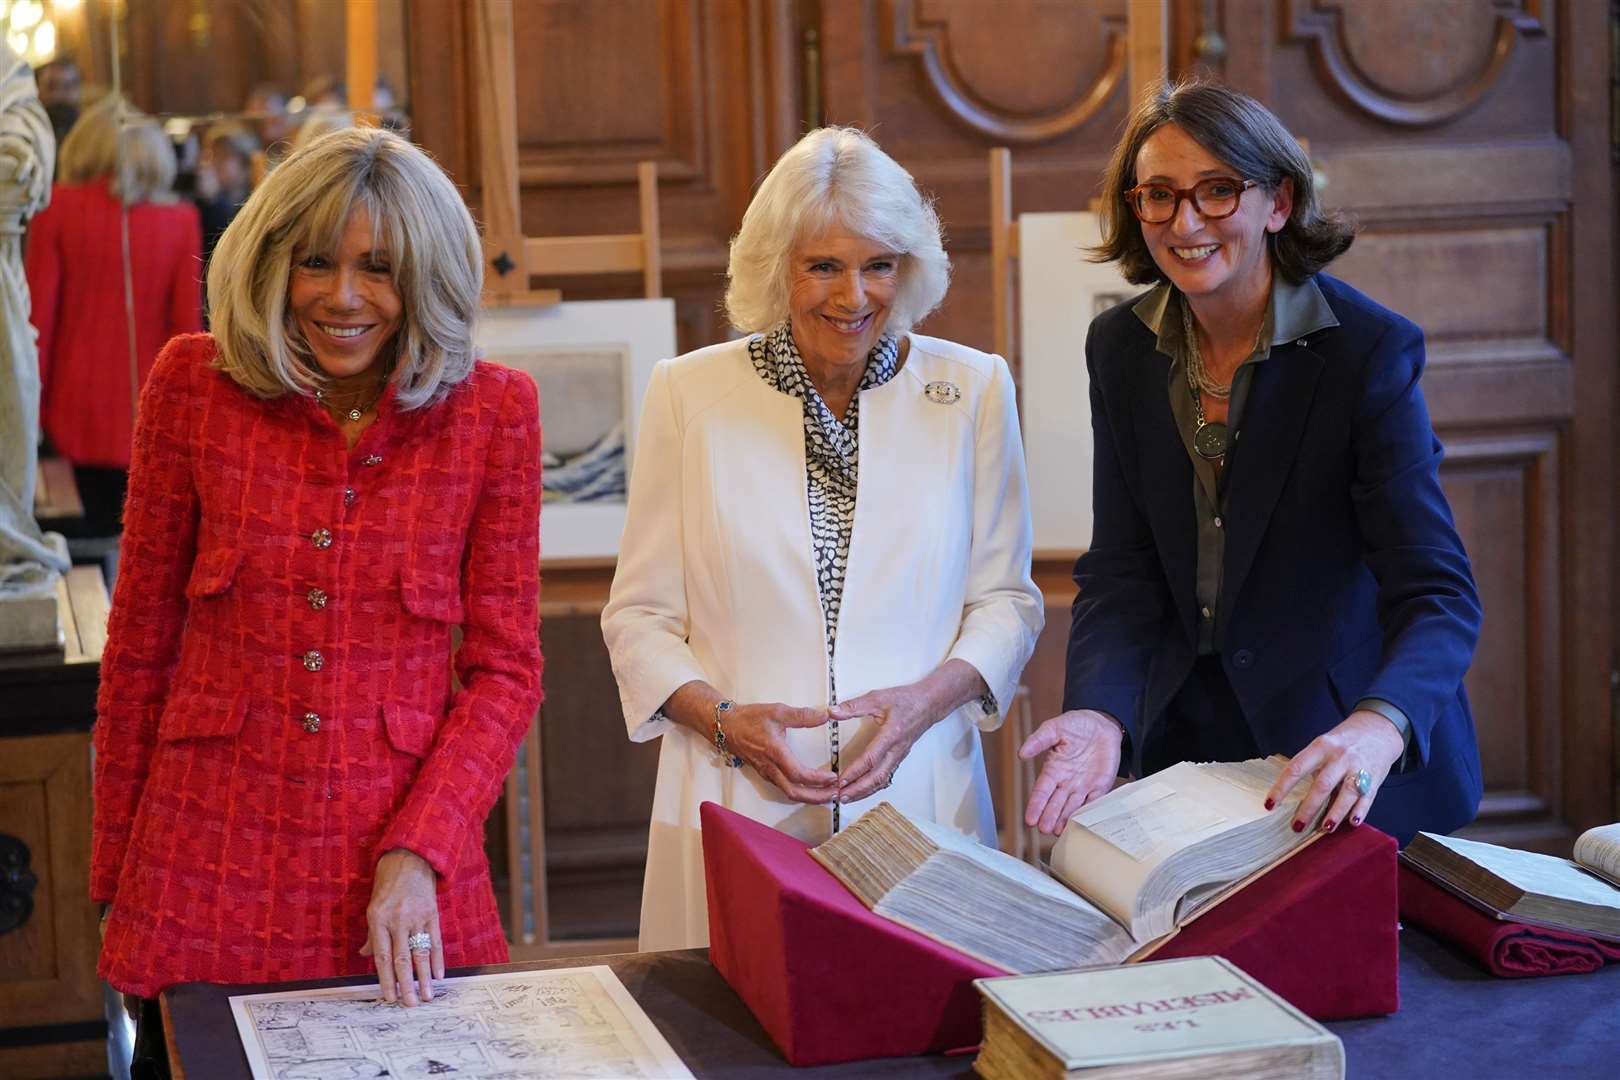 Brigitte Macron and Queen Camilla with president of the French National Library Laurence Engel during a visit to the Bibliotheque Nationale de France in Paris (Yui Mok/PA)